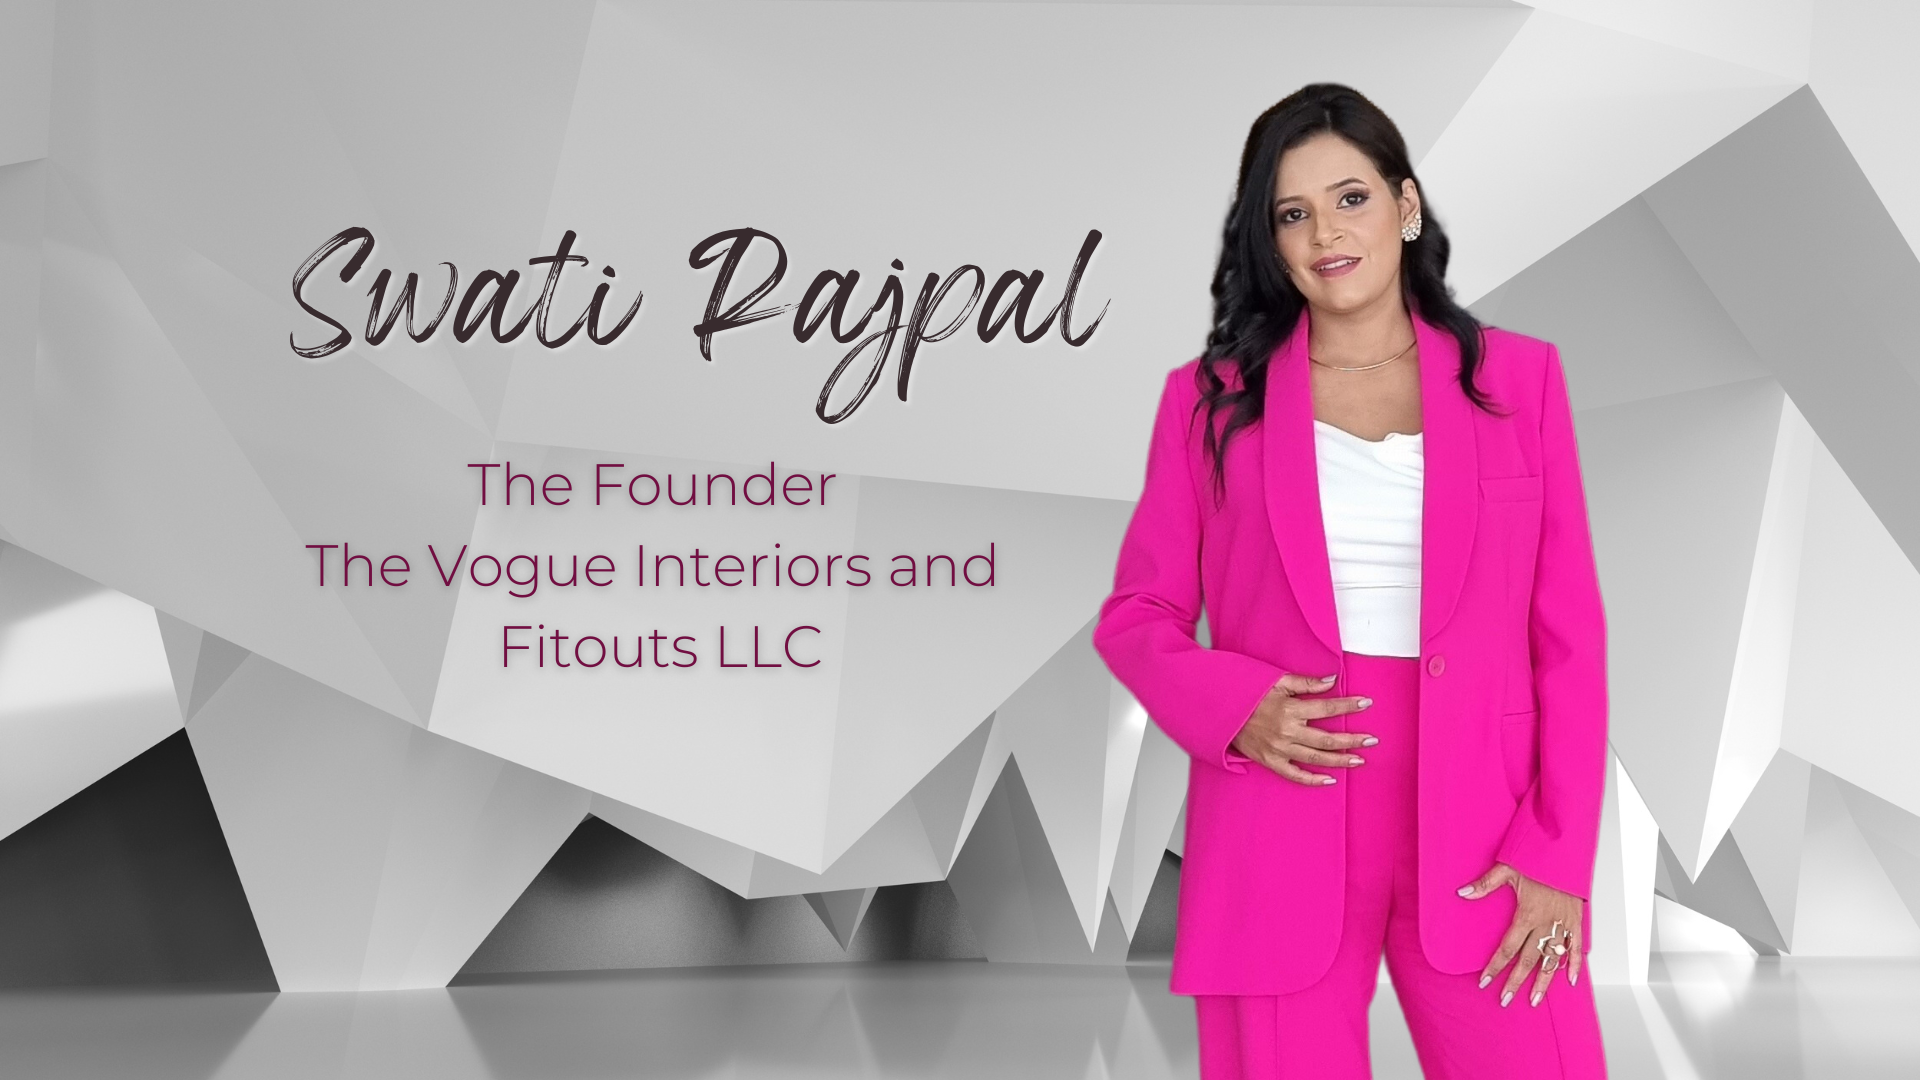 Swati web banner - All about Success from the Interior Designer - Swati Rajpal